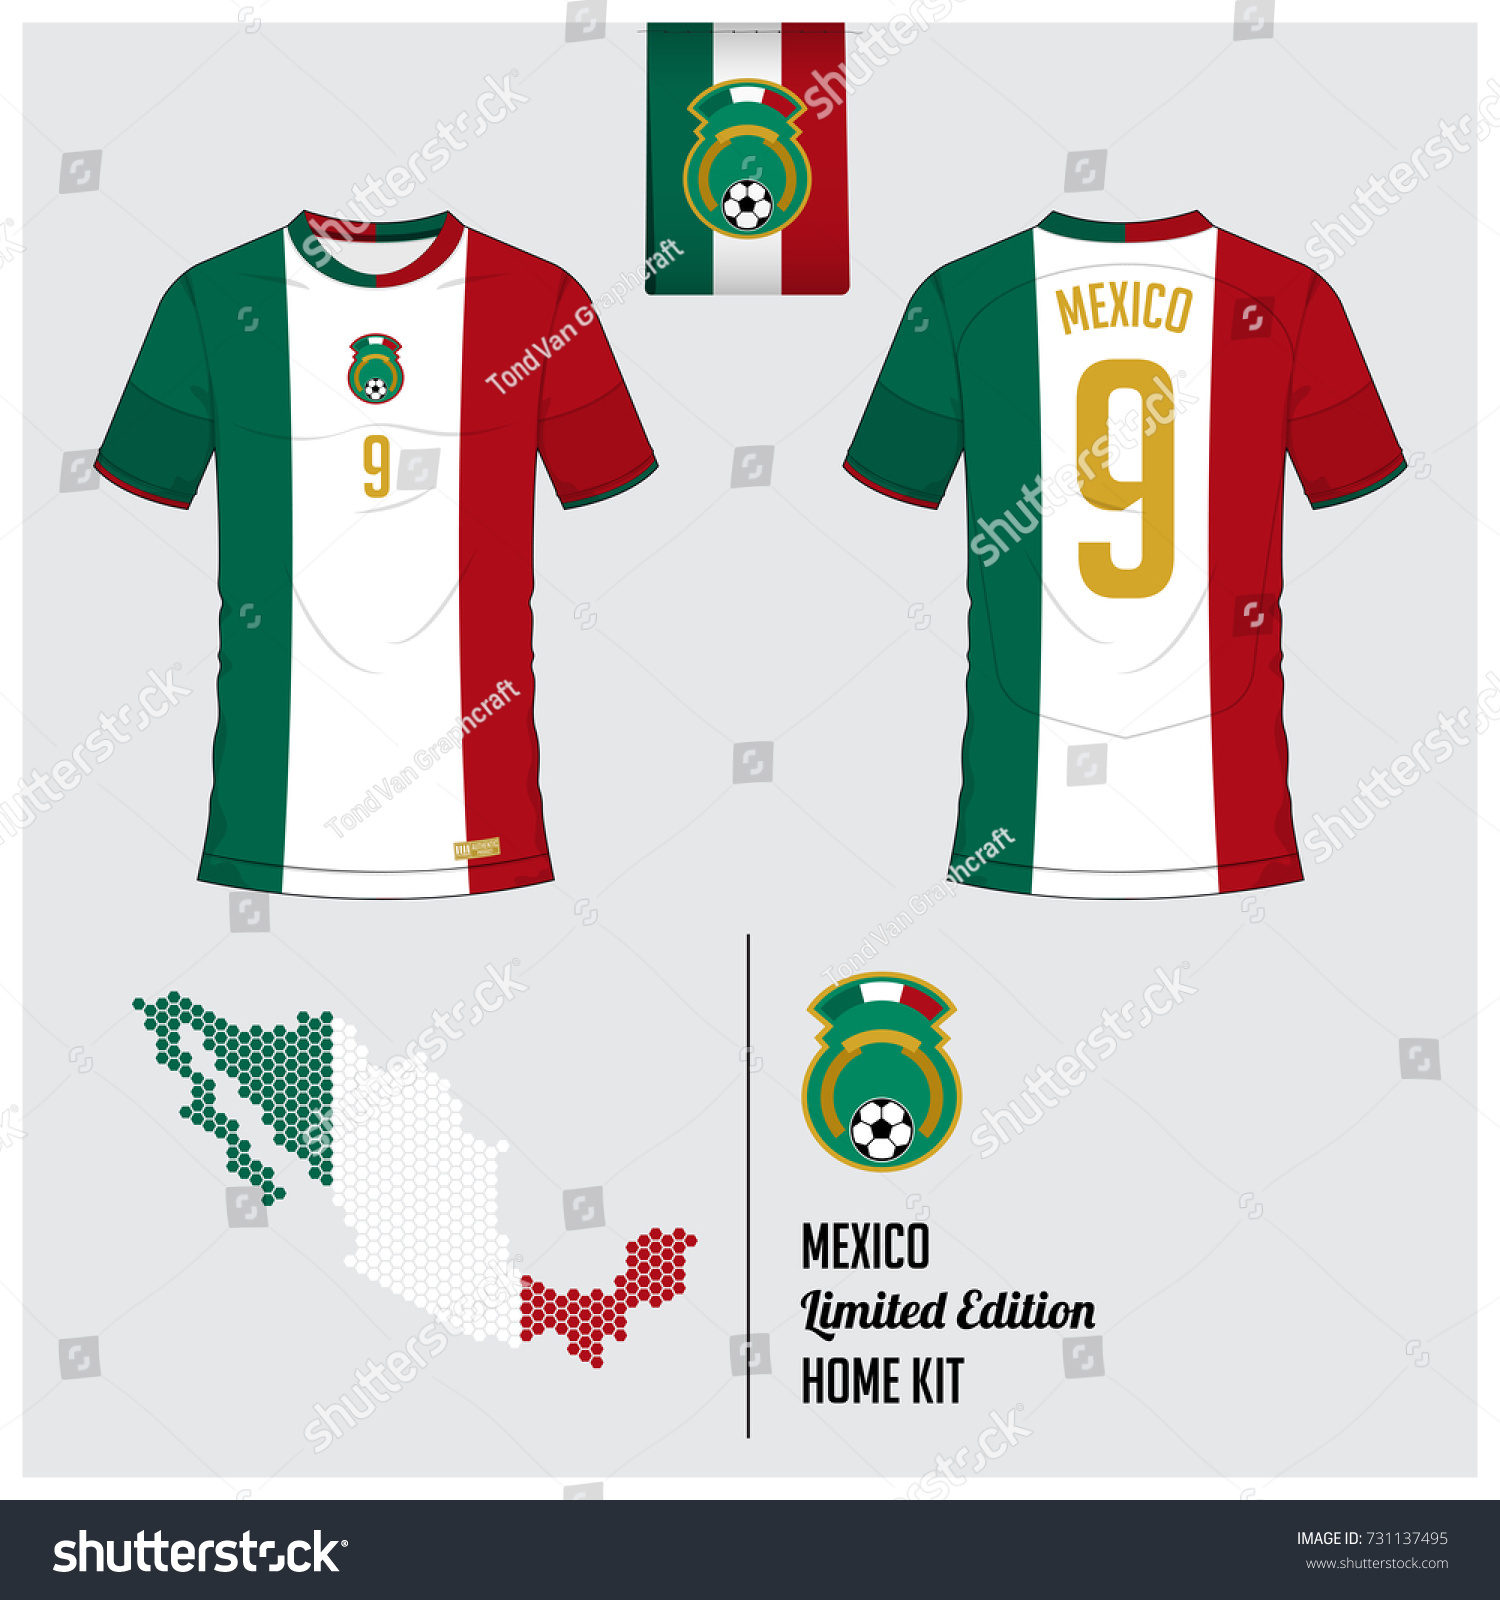 red and green soccer jersey